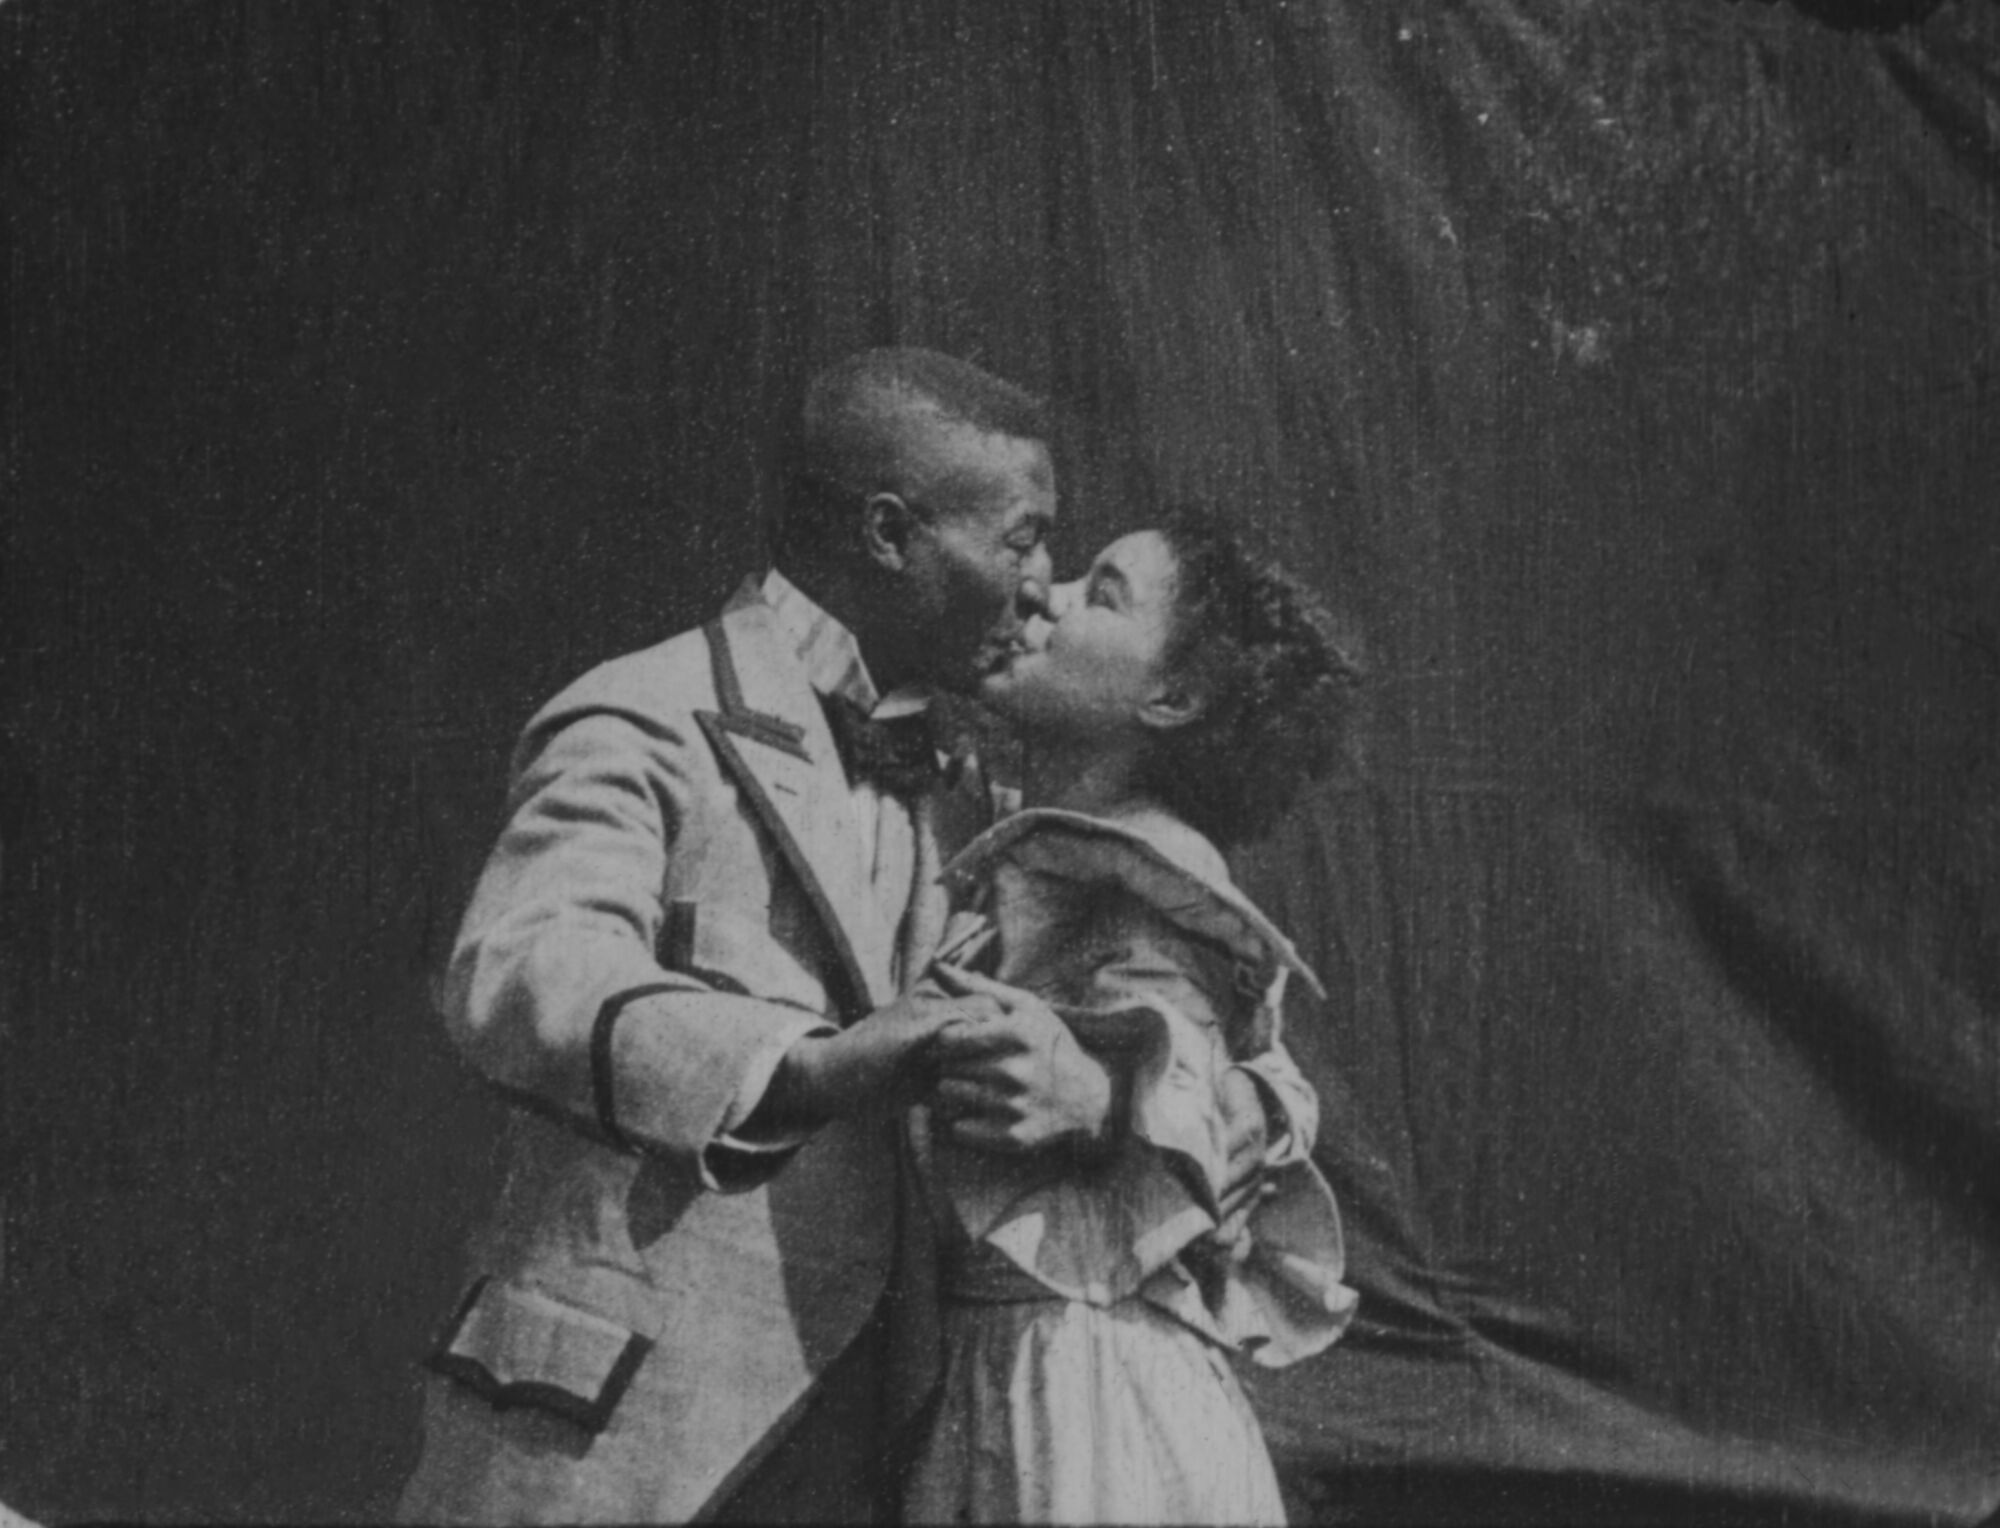 Film still from William Selig's Something Good - Negro Kiss (1898), with Saint Suttle and Gertie Brown.